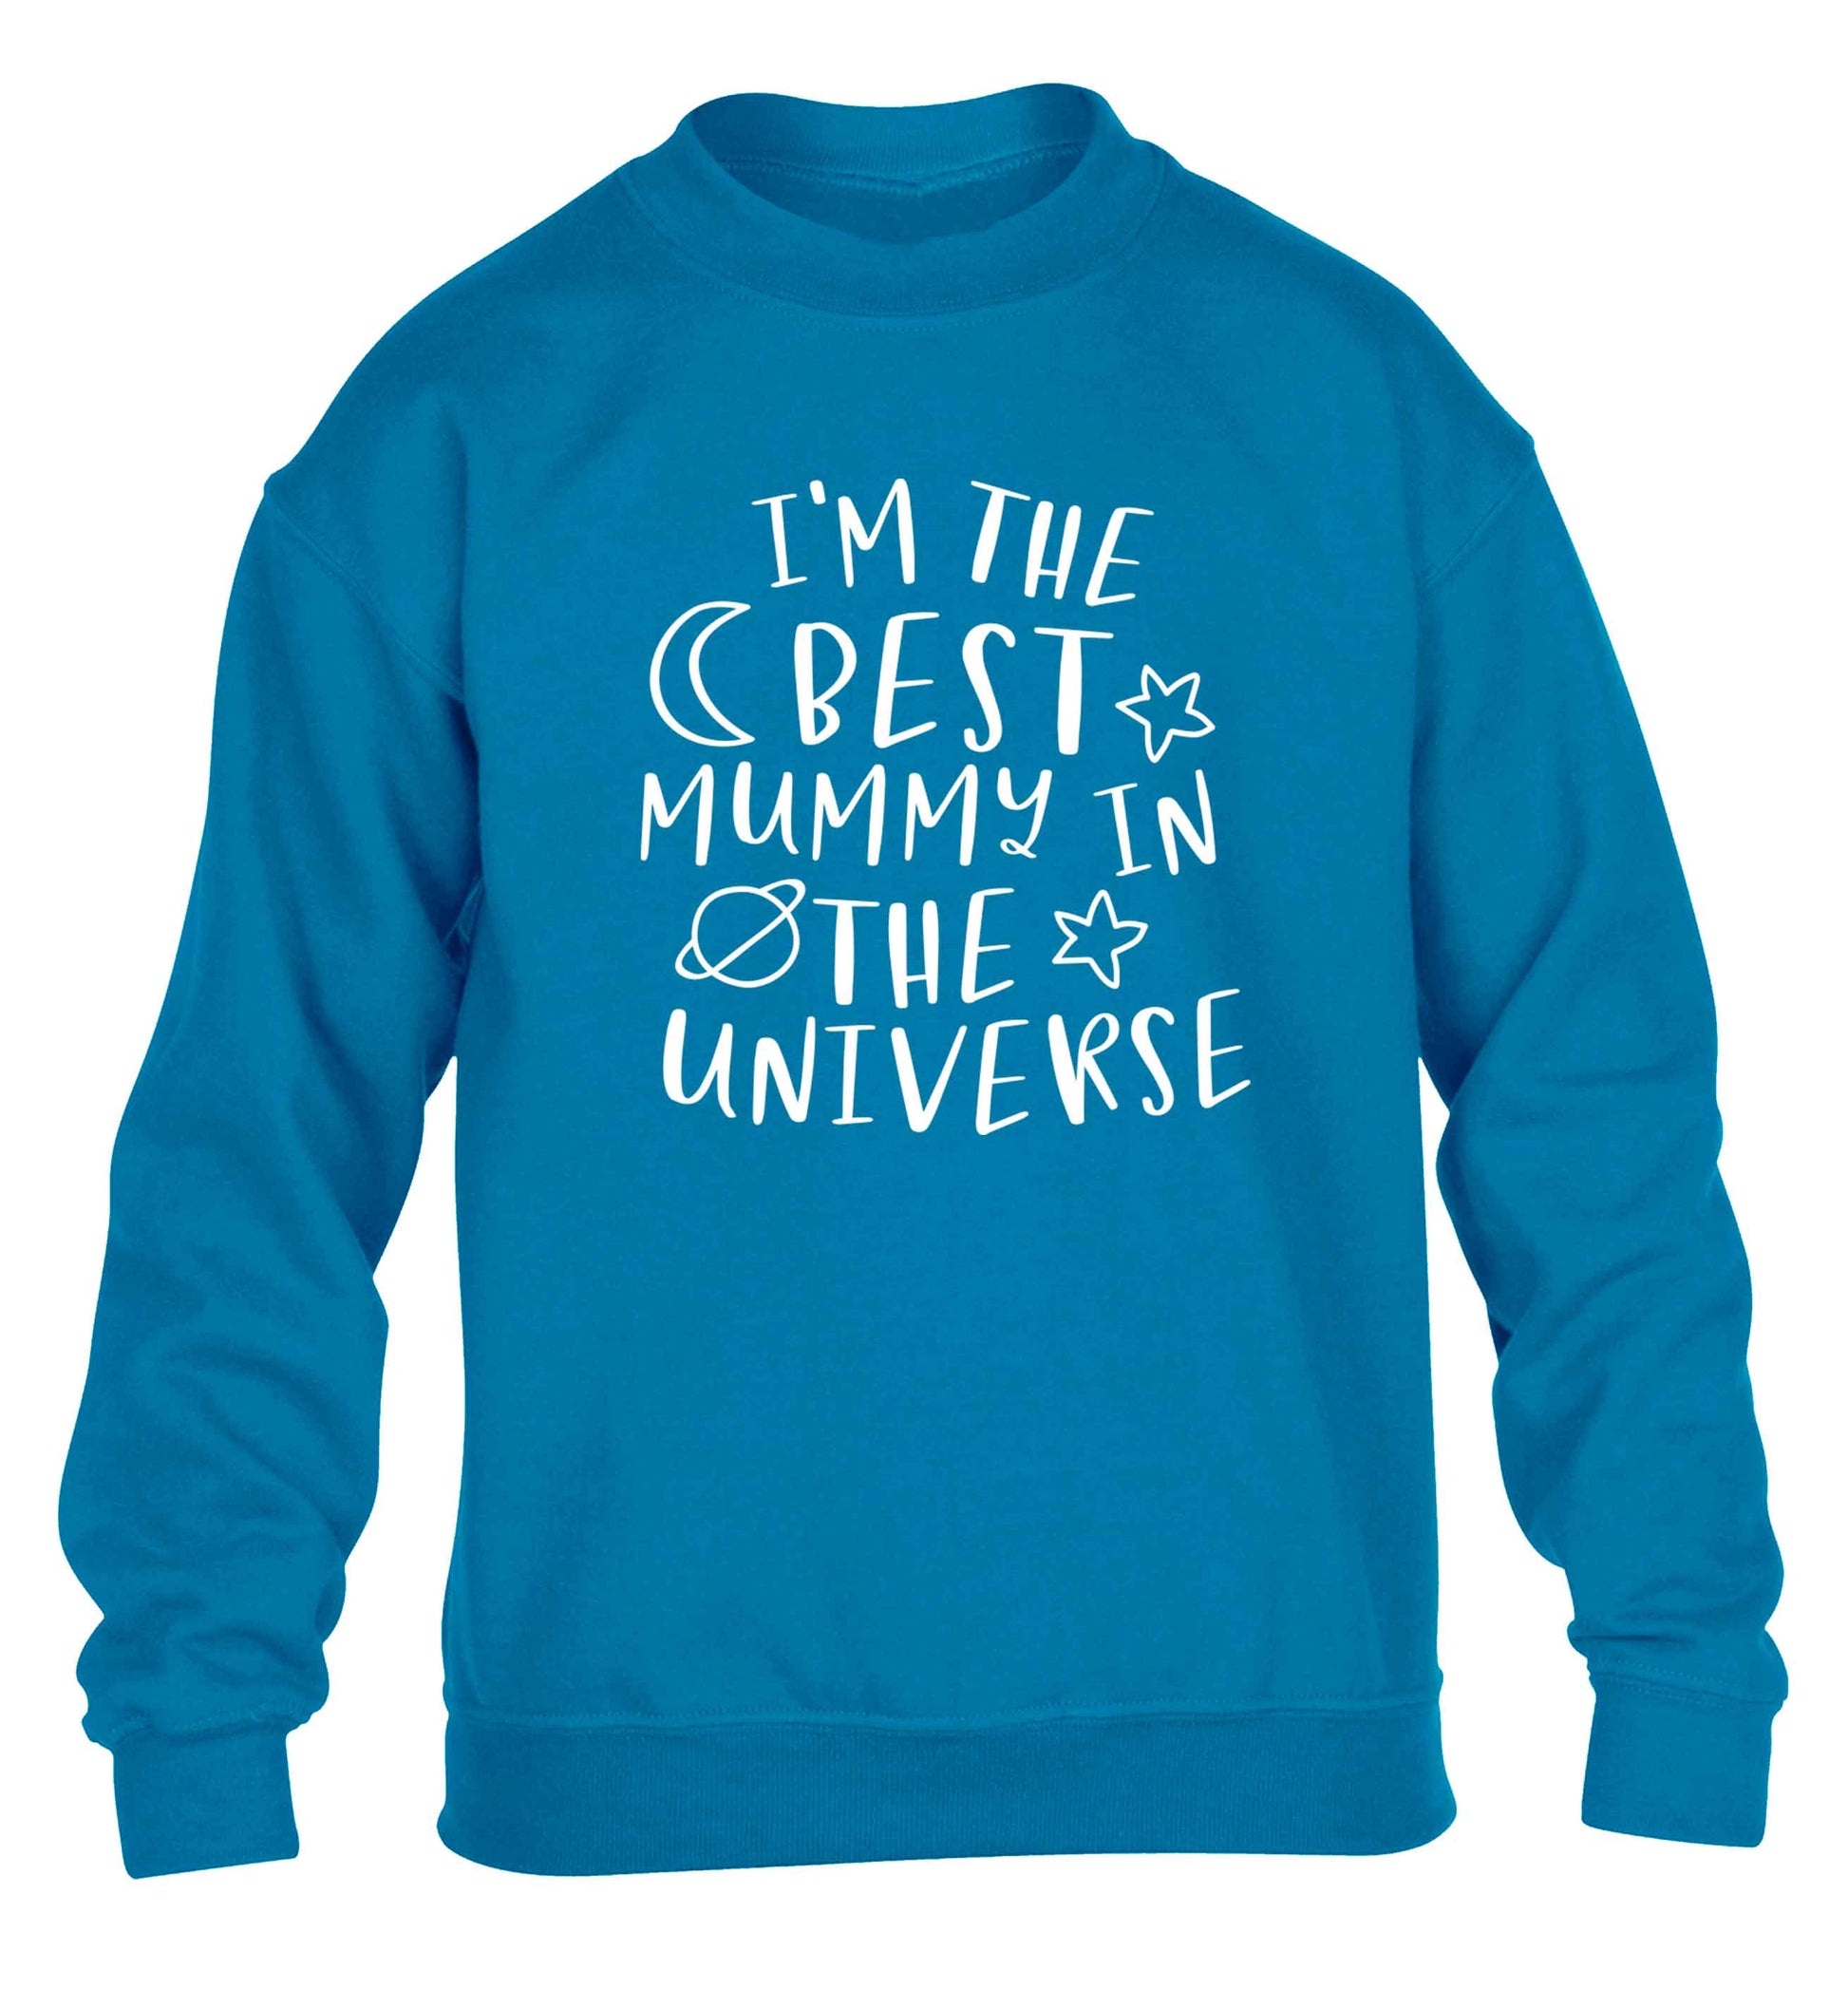 I'm the best mummy in the universe children's blue sweater 12-13 Years